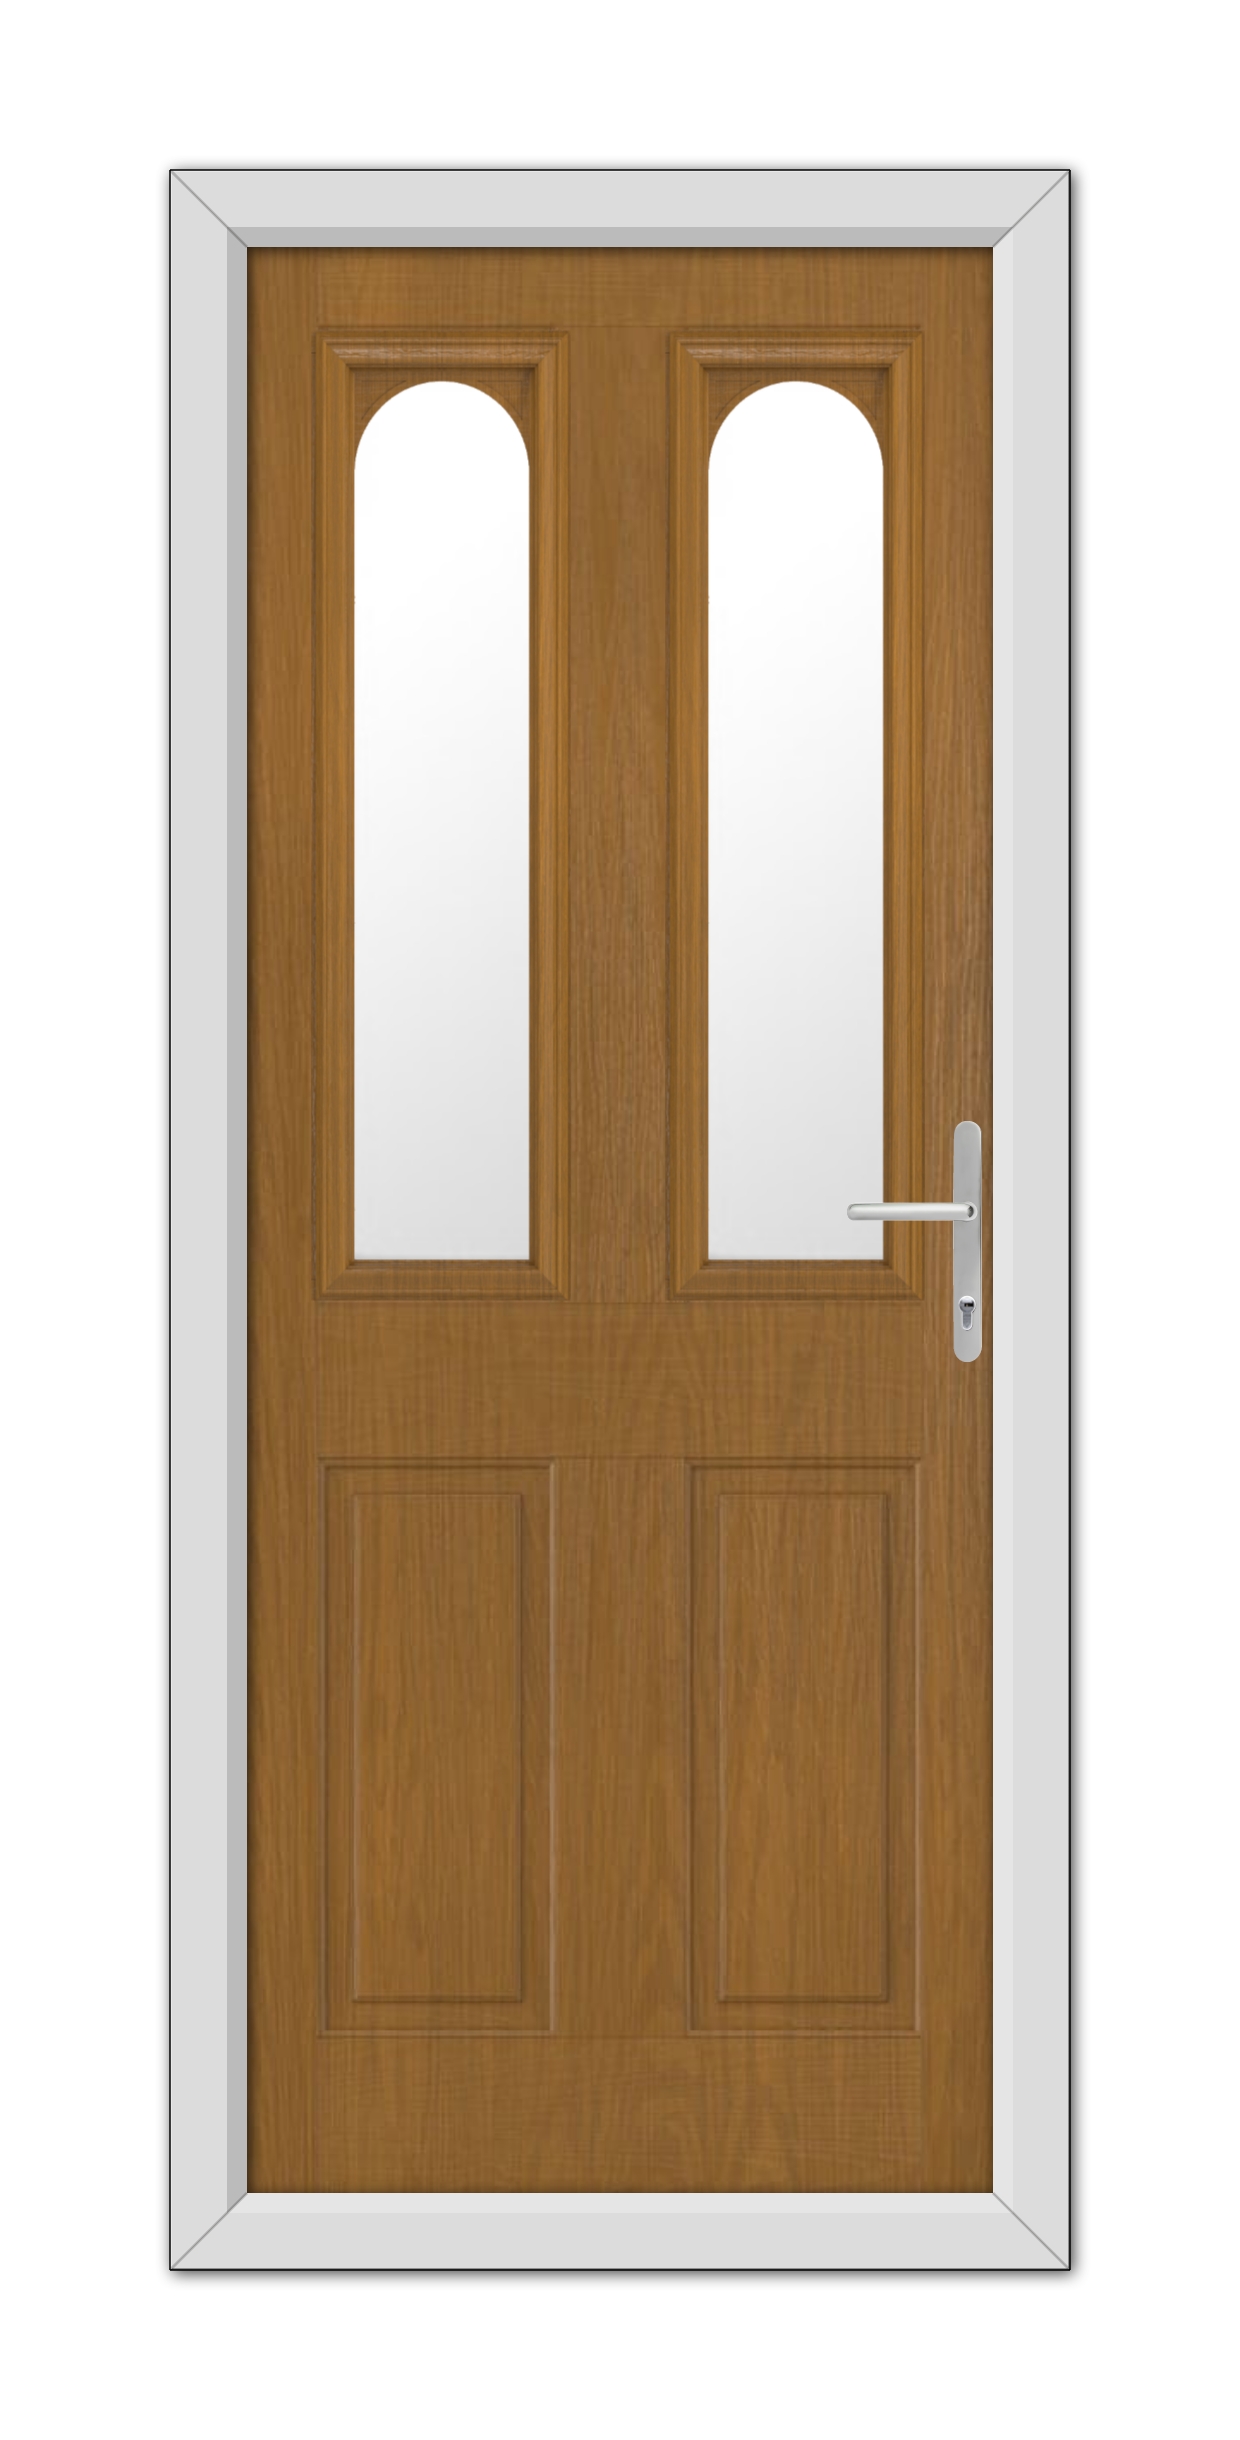 A Oak Elmhurst Composite Door 48mm Timber Core with two vertical glass panels and a modern handle, set in a white frame.